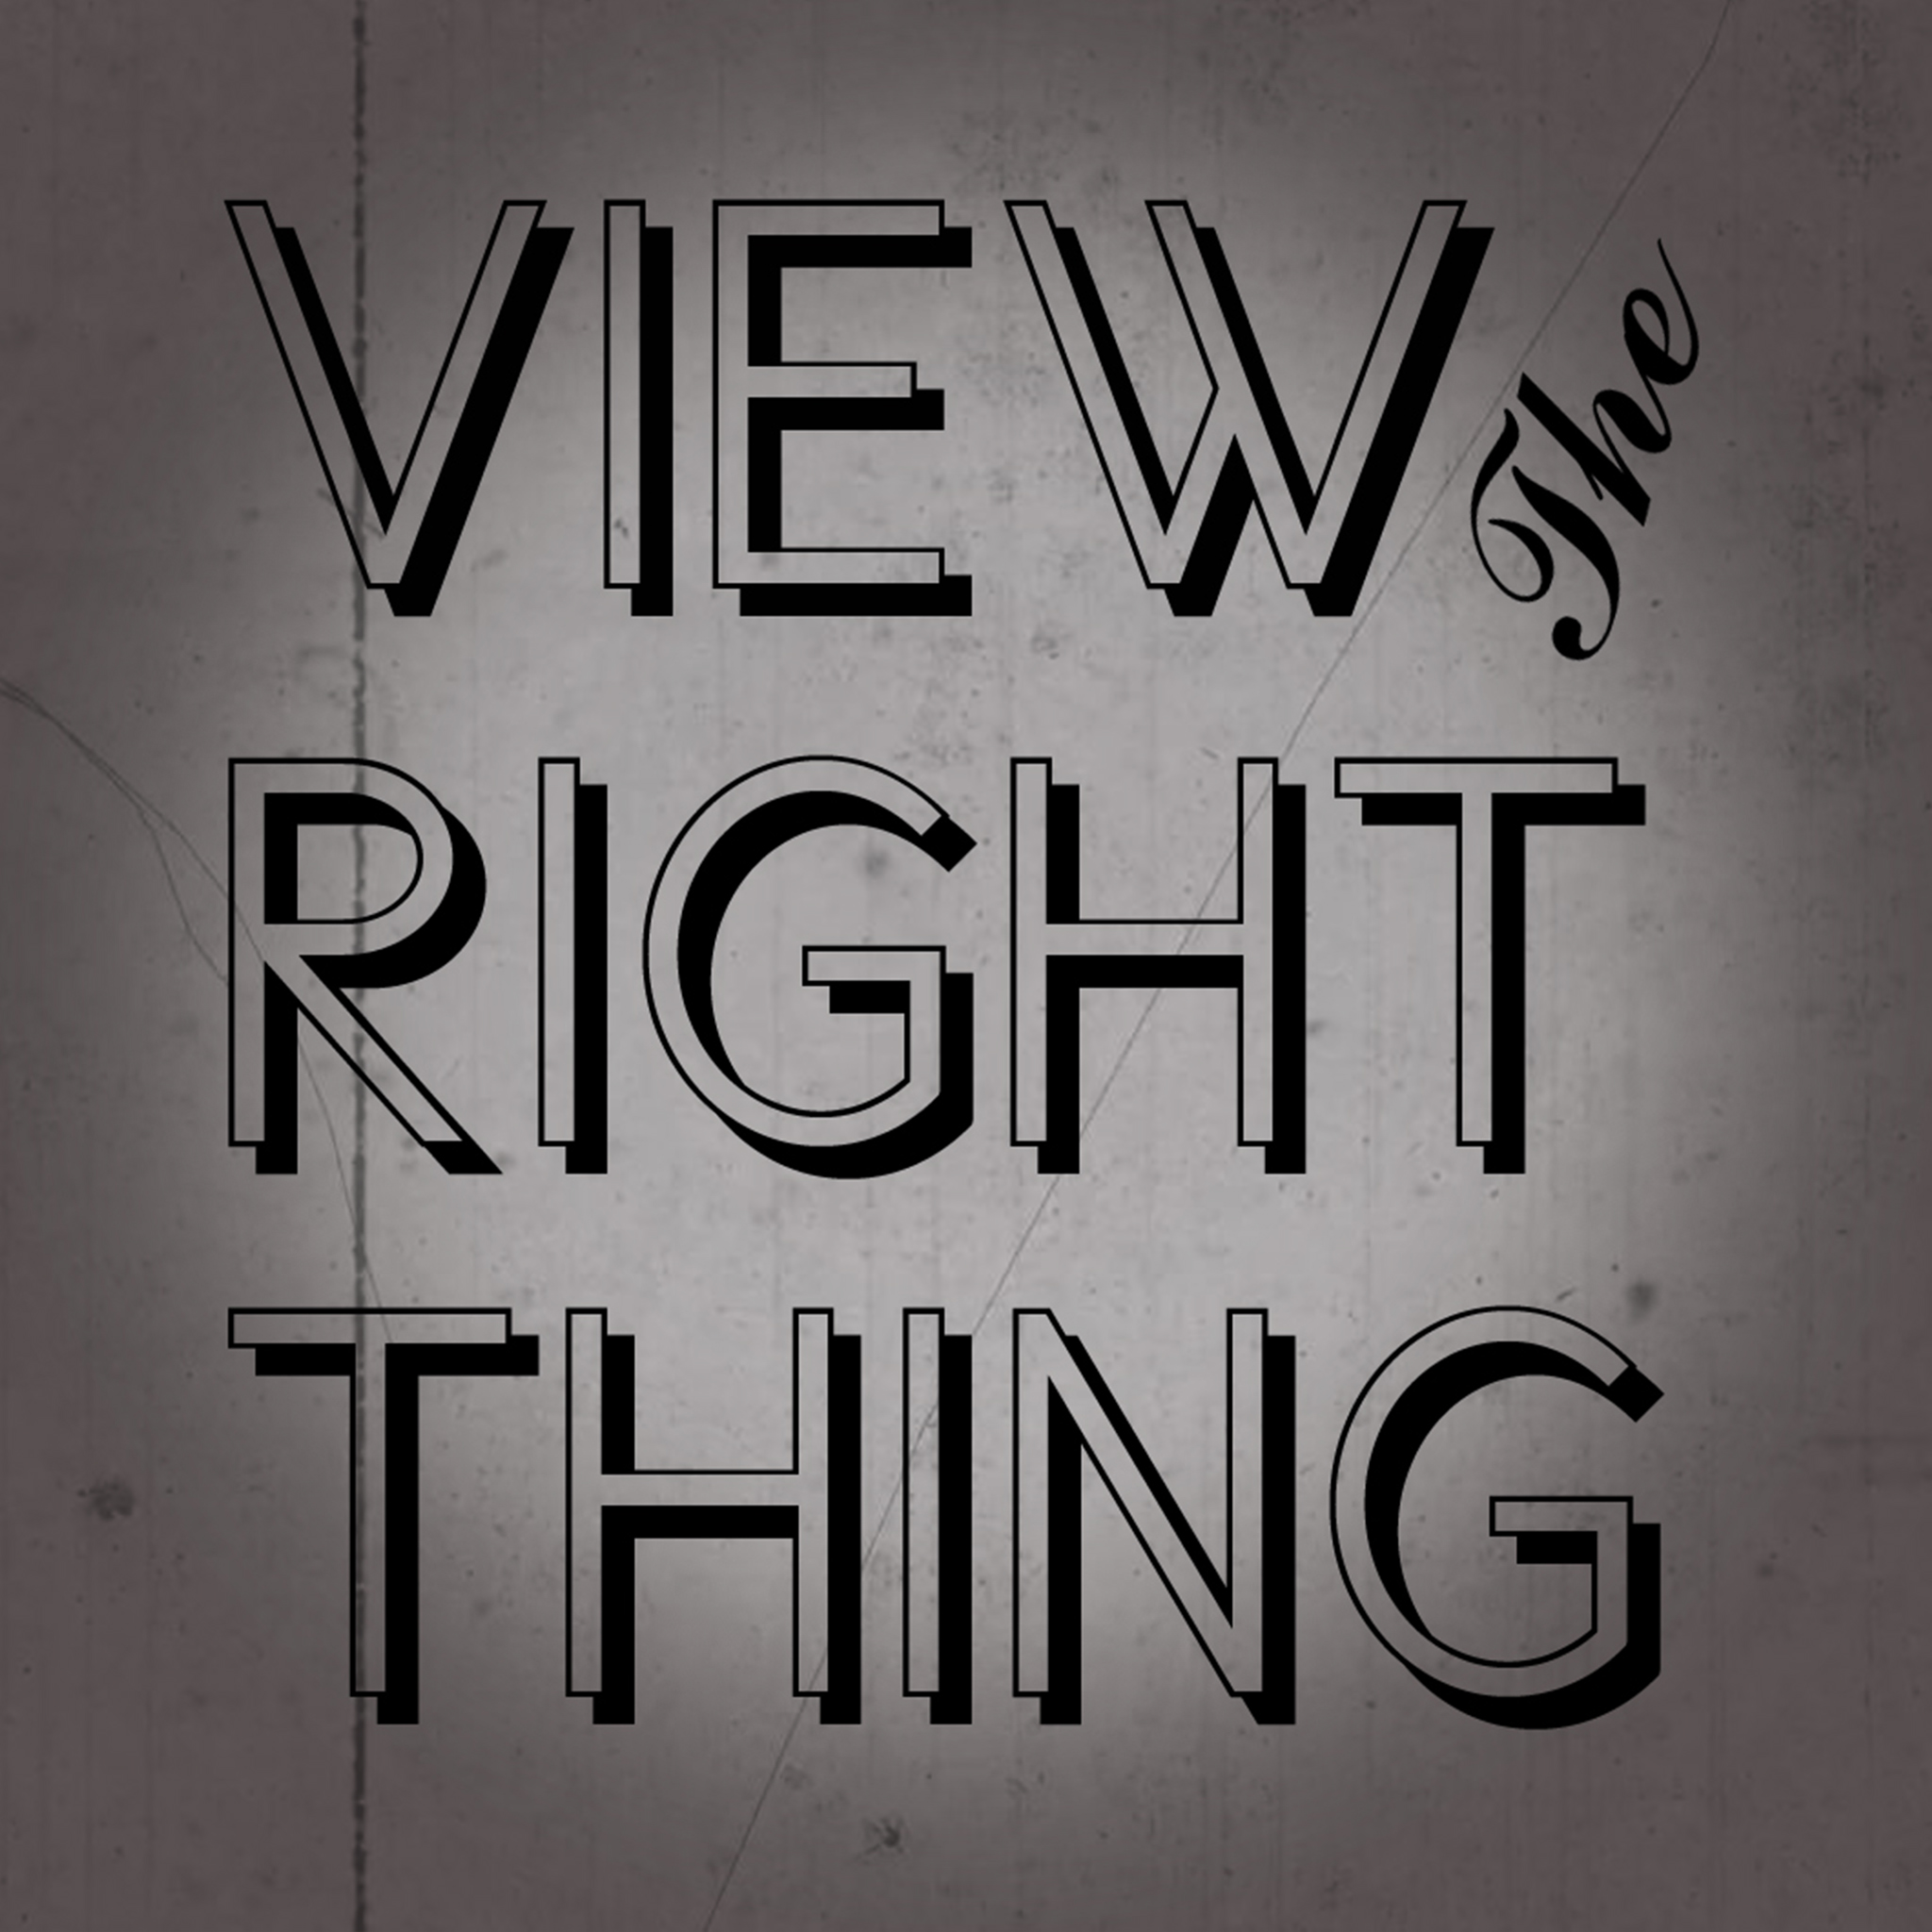 View the Right Thing